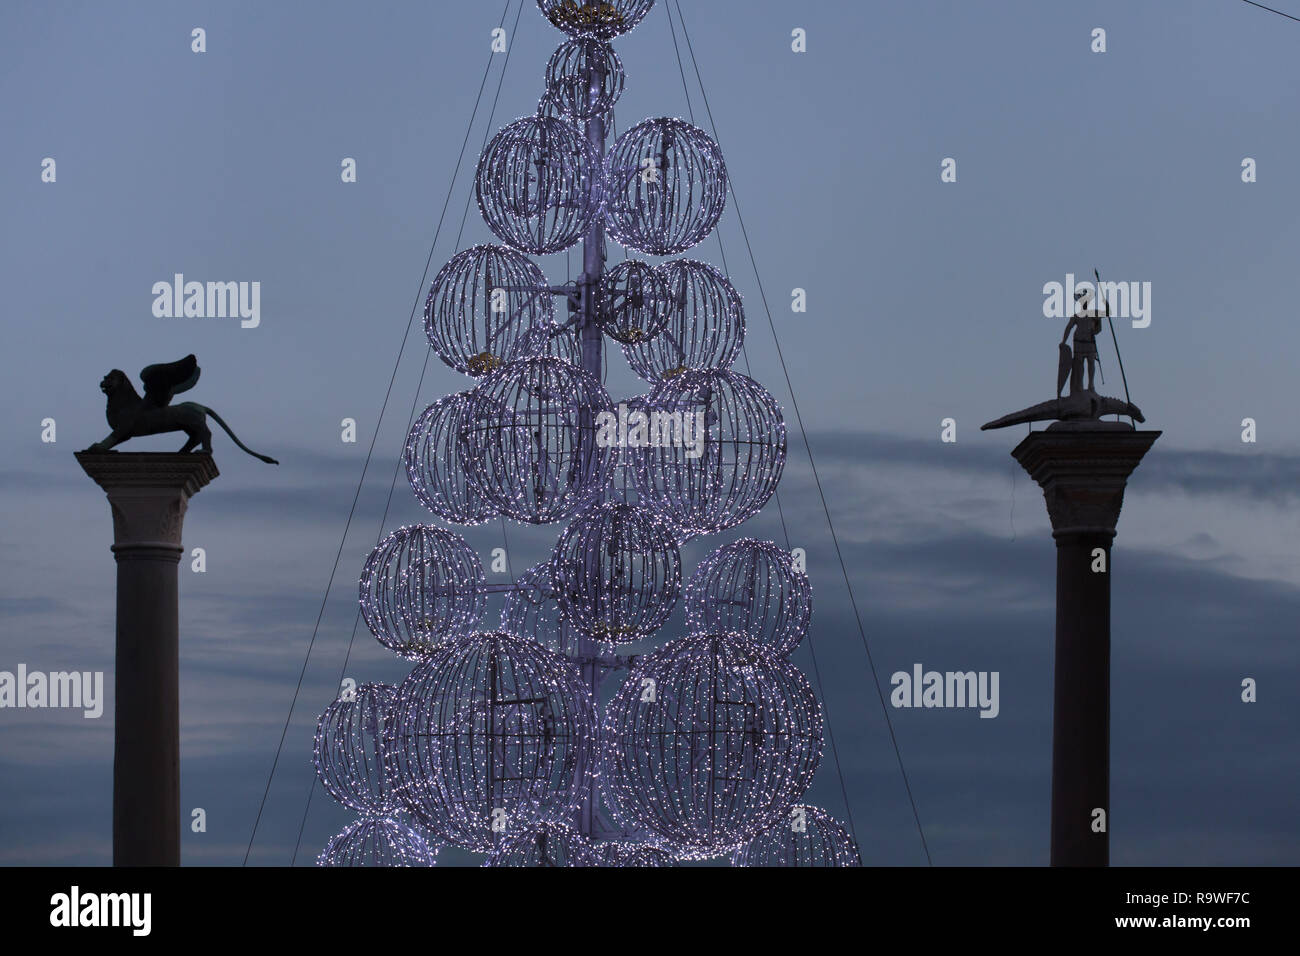 Christmas tree installed between the Column of Saint Mark (Colonna di San Marco) and the Column of Saint Theodore (Colonna di San Todaro) in Piazzetta di San Marco in Venice, Italy. Stock Photo